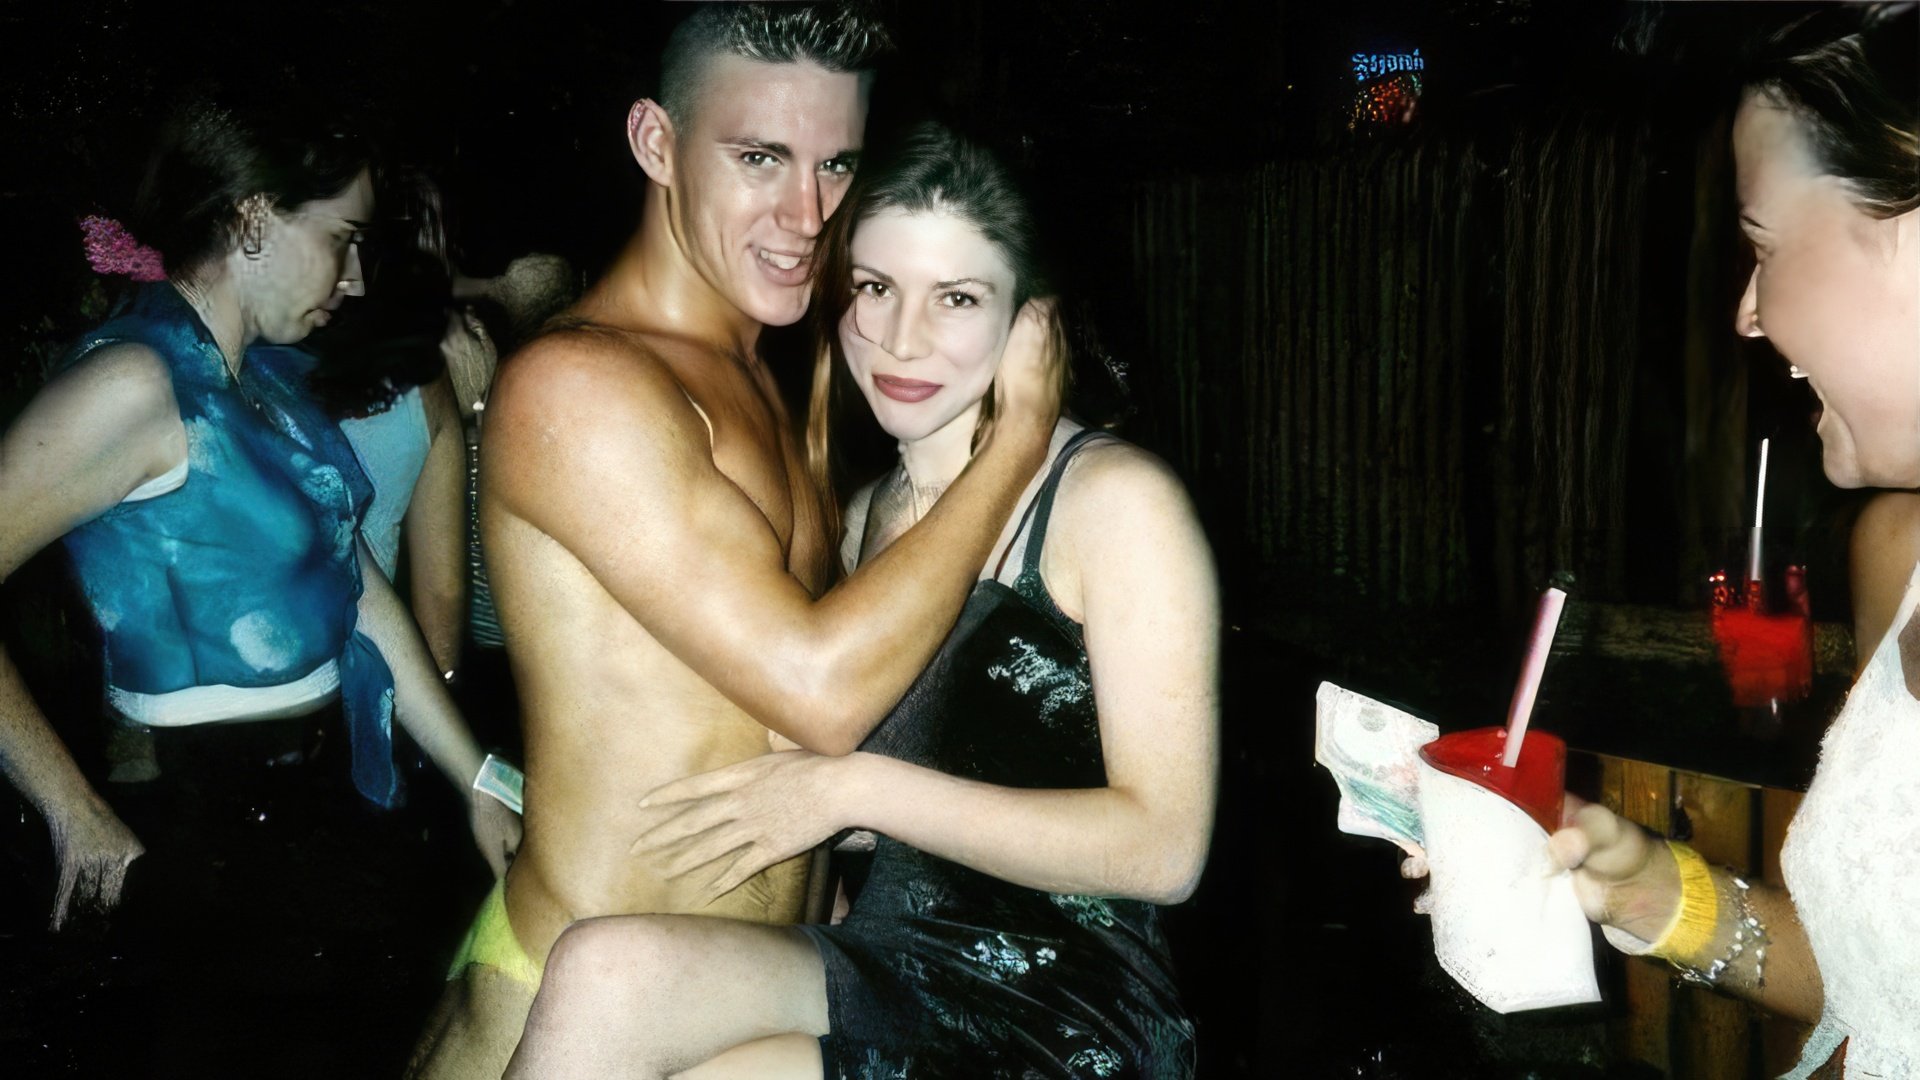 In his youth, Channing Tatum worked as a stripper in a nightclub